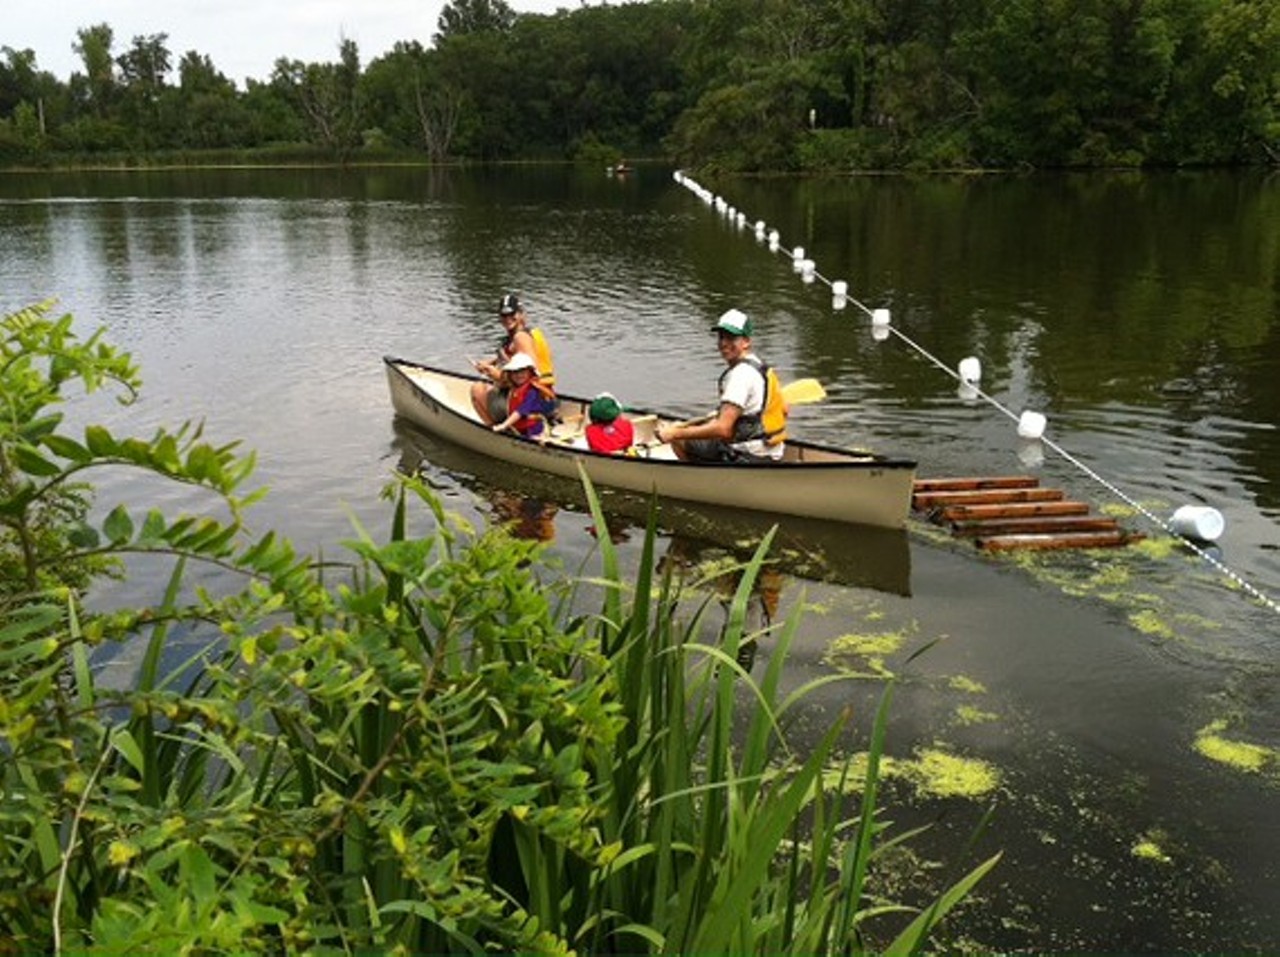 Enjoy an afternoon of paddling and picnicking along the banks of Lower Shaker Lake in Shaker Heights on Saturday, August 24. Area residents may bring their own kayak or canoe for launching from the shore. Those without boats may sign up for a kayak and an introductory paddling class for a $5 fee, led by Cleveland Metroparks specialists. Registration is required for all participants. Call 216-321-5935 x 244 or visit www.doanbrookpartnership.org for details. The event is sponsored by the Doan Brook Watershed Partnership.